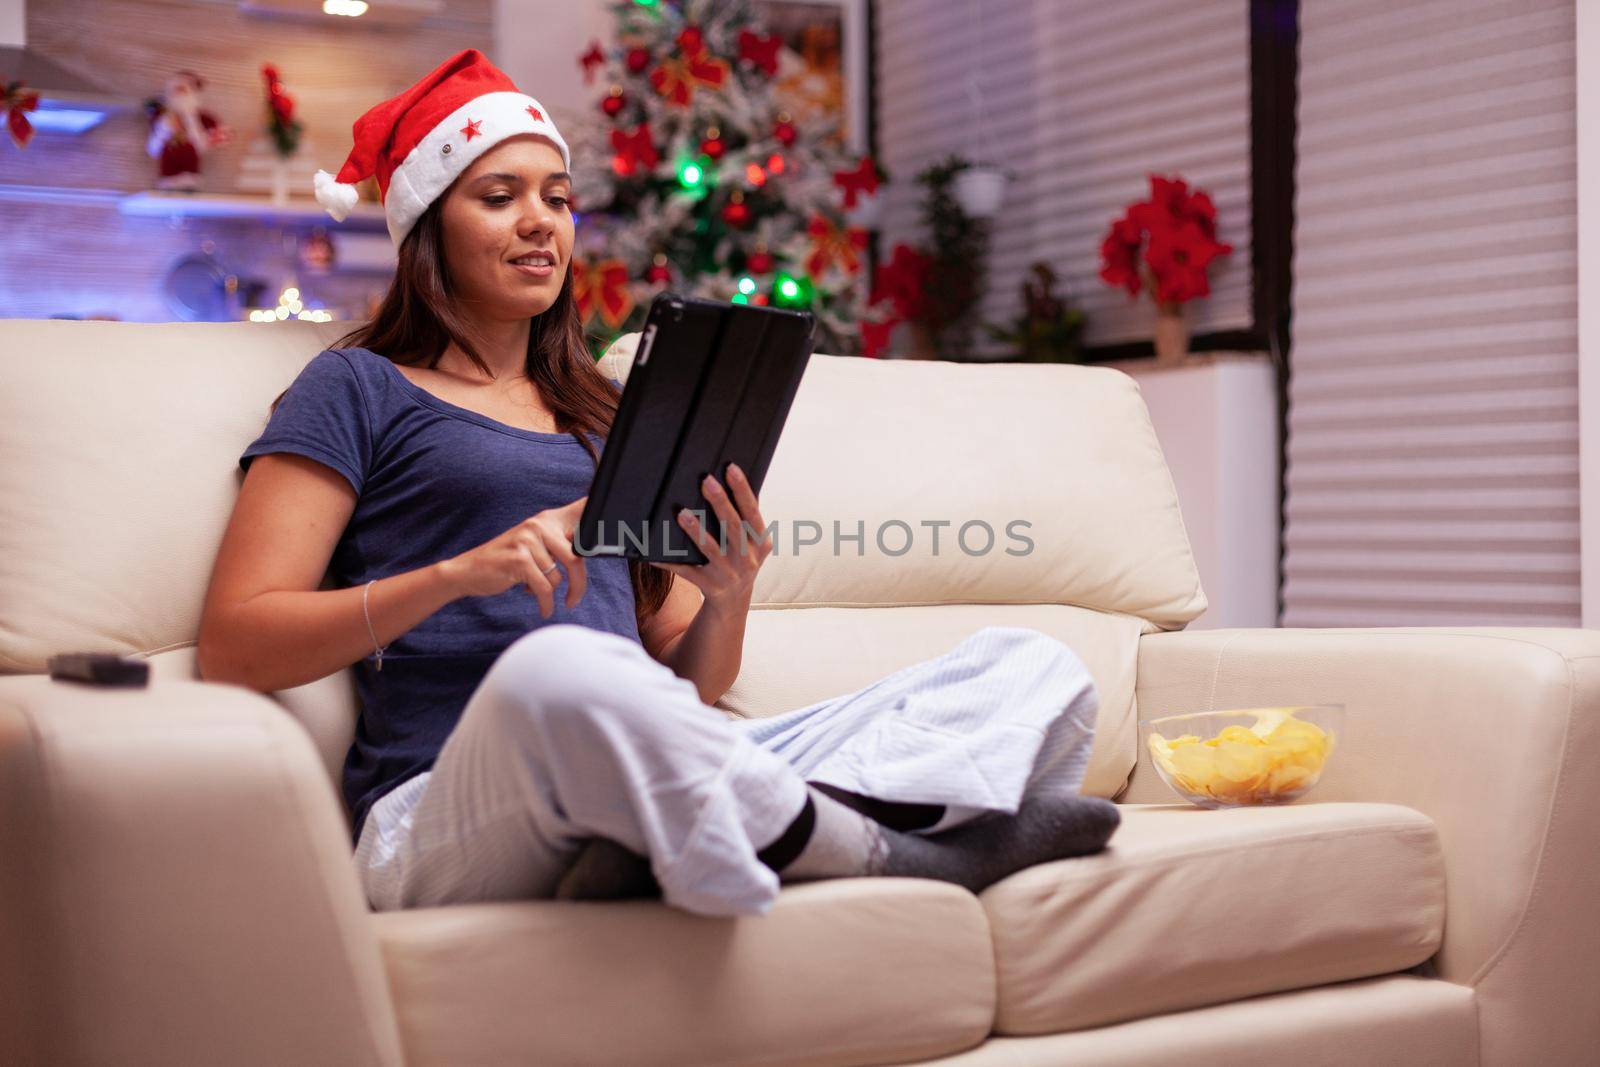 Woman sitting in lotus position on sofa browsing on social media writing xmas email messaging with friends using tablet computer. Adult person celebrating christmas season enjoying winter holiday